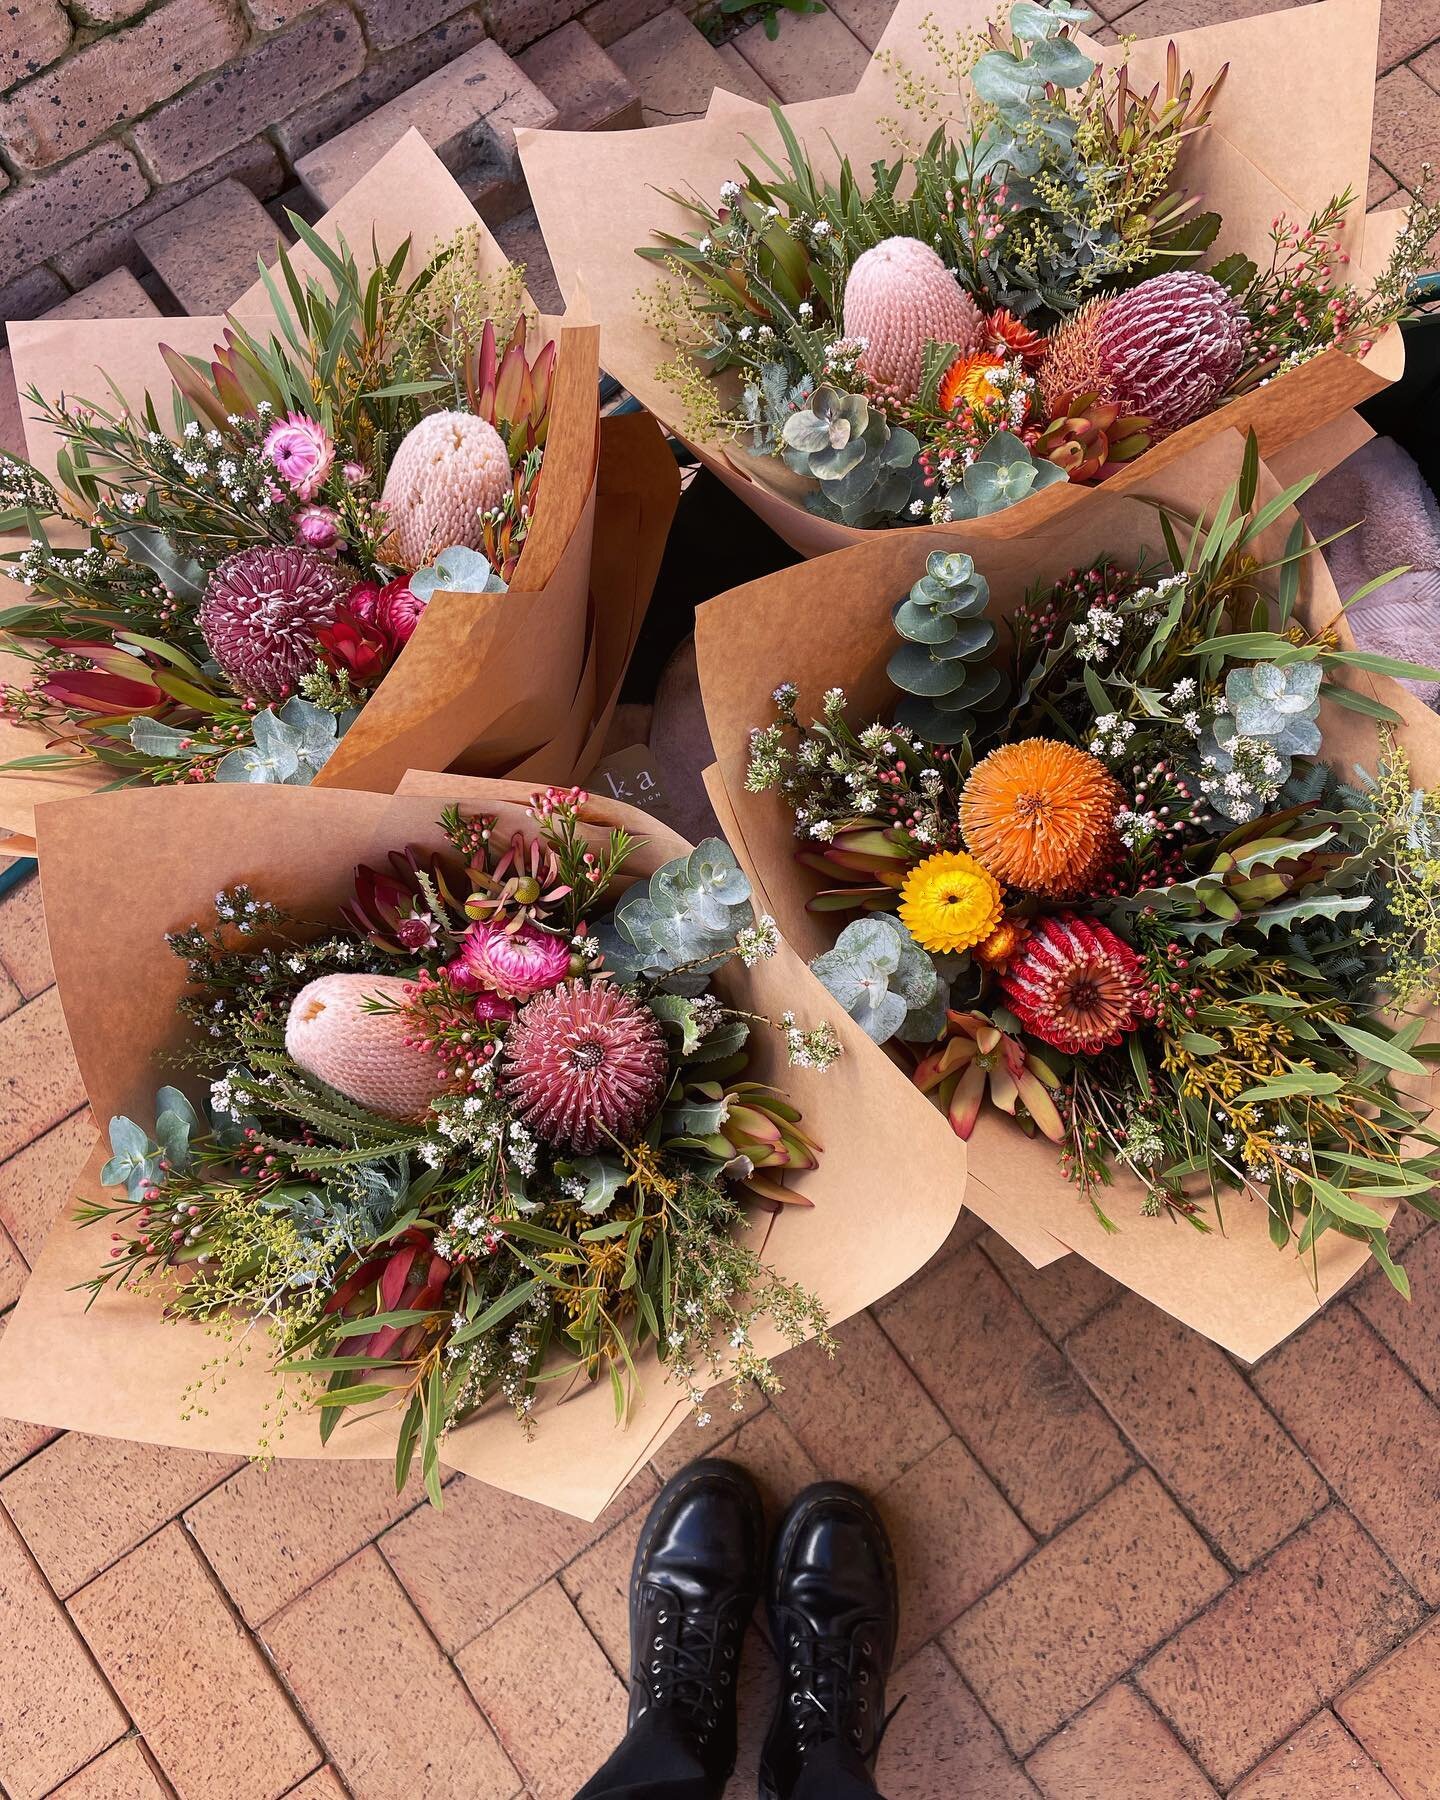 Sustainable &amp; plastic-free wildflower bouquets 💐🫶🌏

We source the freshest, seasonal, Australian-grown flowers and wrap them in 100% recyclable and compostable materials! ♻️

Available to pre-order via our website for pickup or delivery Wednes